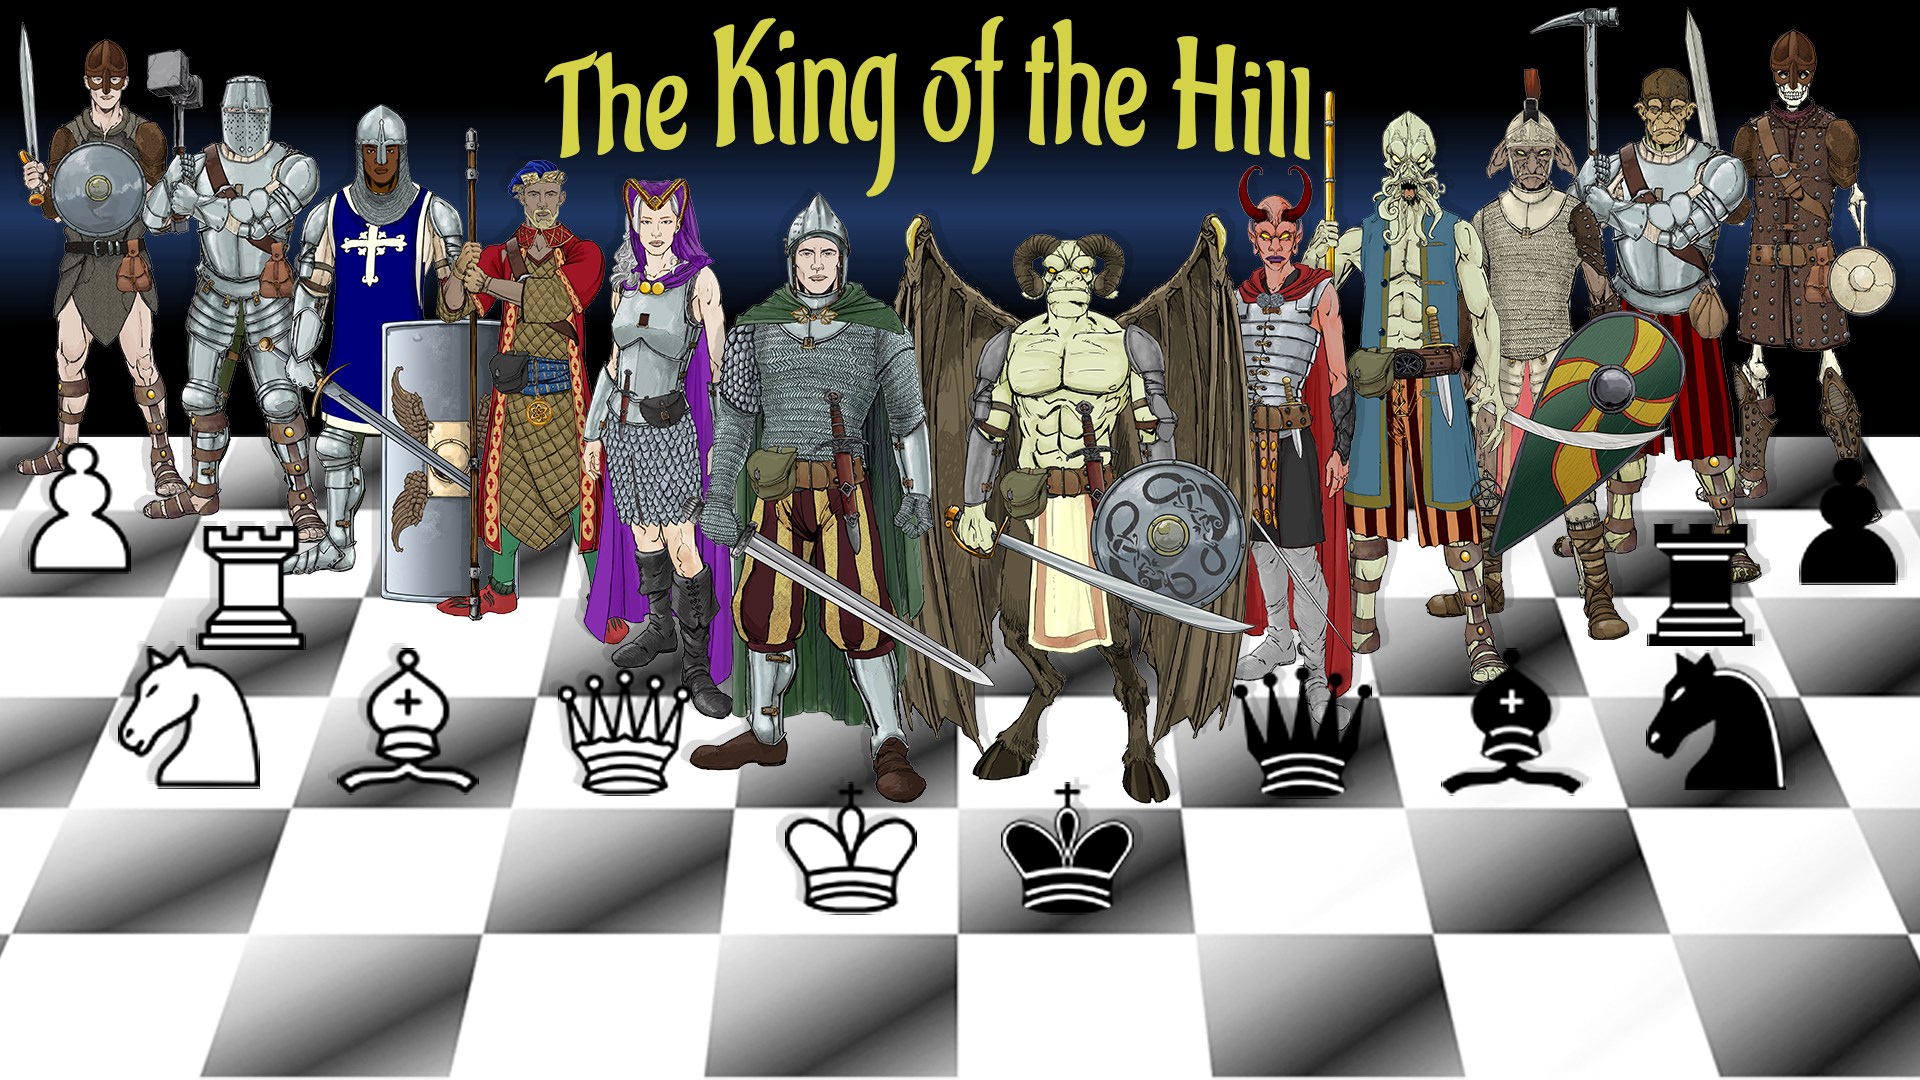 King of the Hill, Board Game